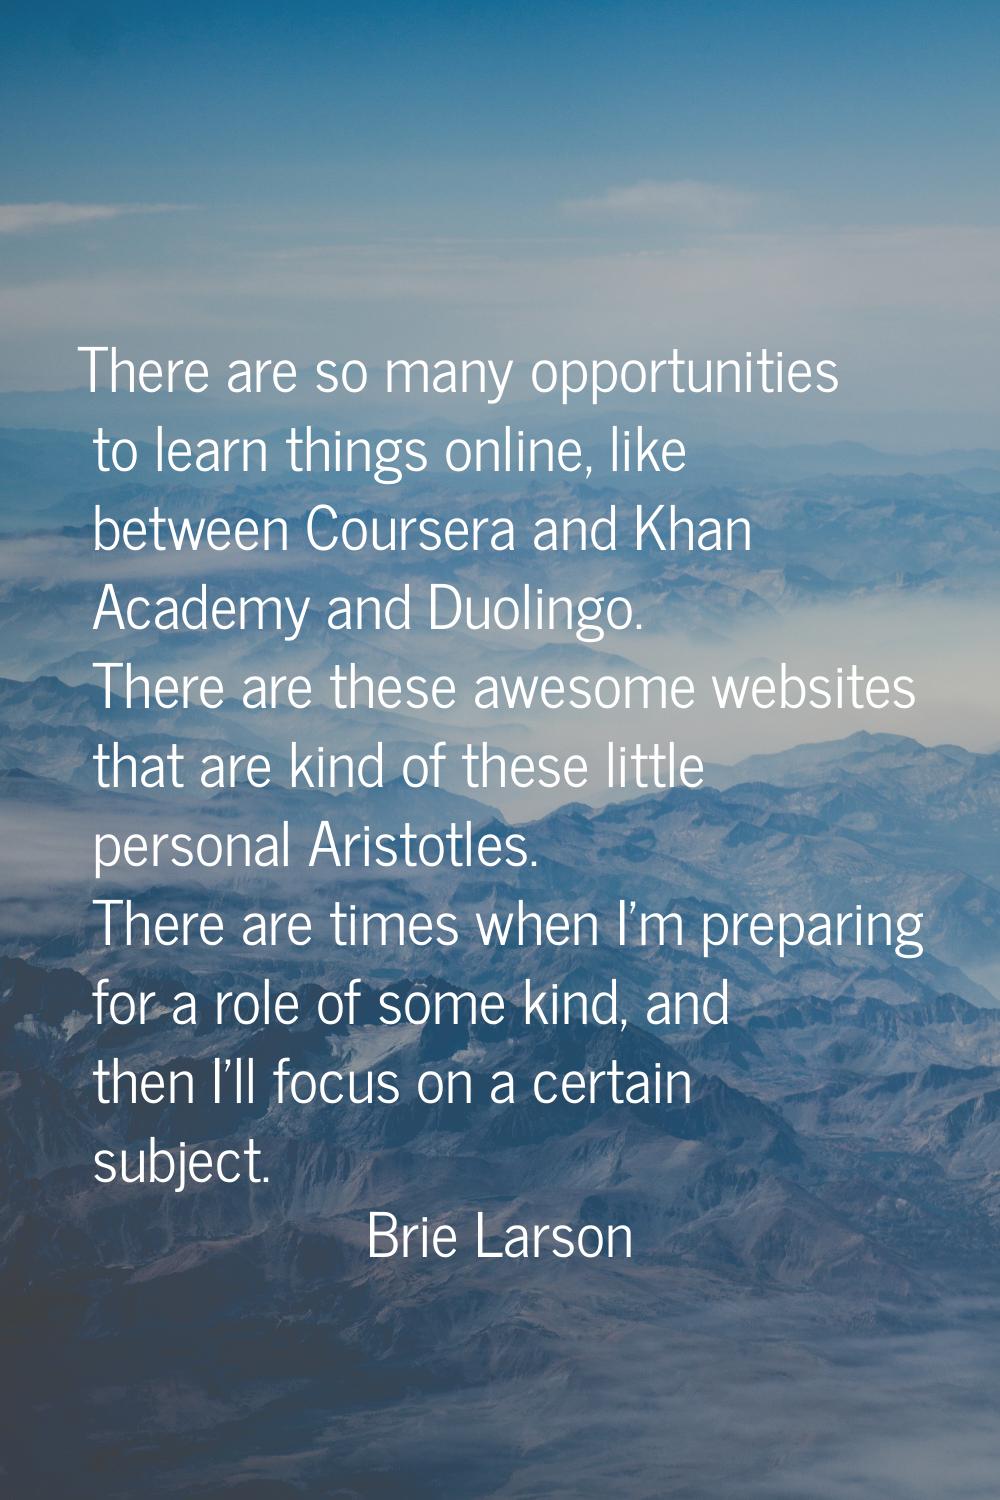 There are so many opportunities to learn things online, like between Coursera and Khan Academy and 